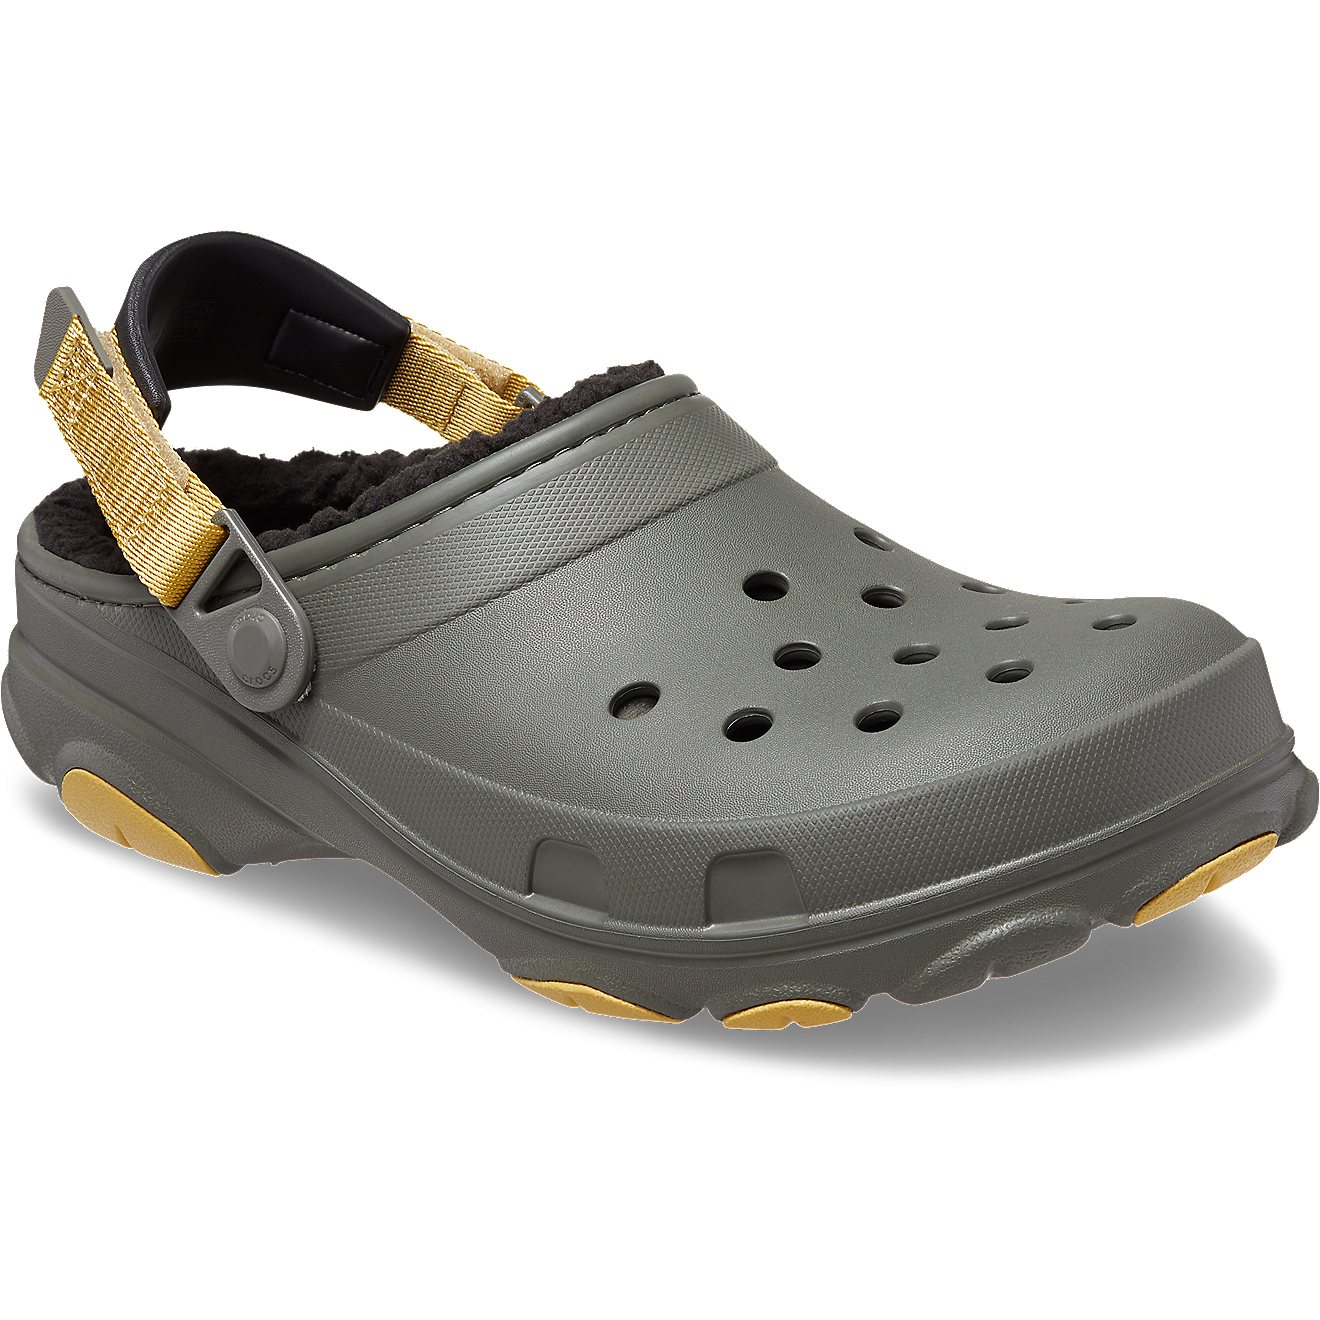 Crocs Adult All Terrain Lined Clogs | Free Shipping at Academy